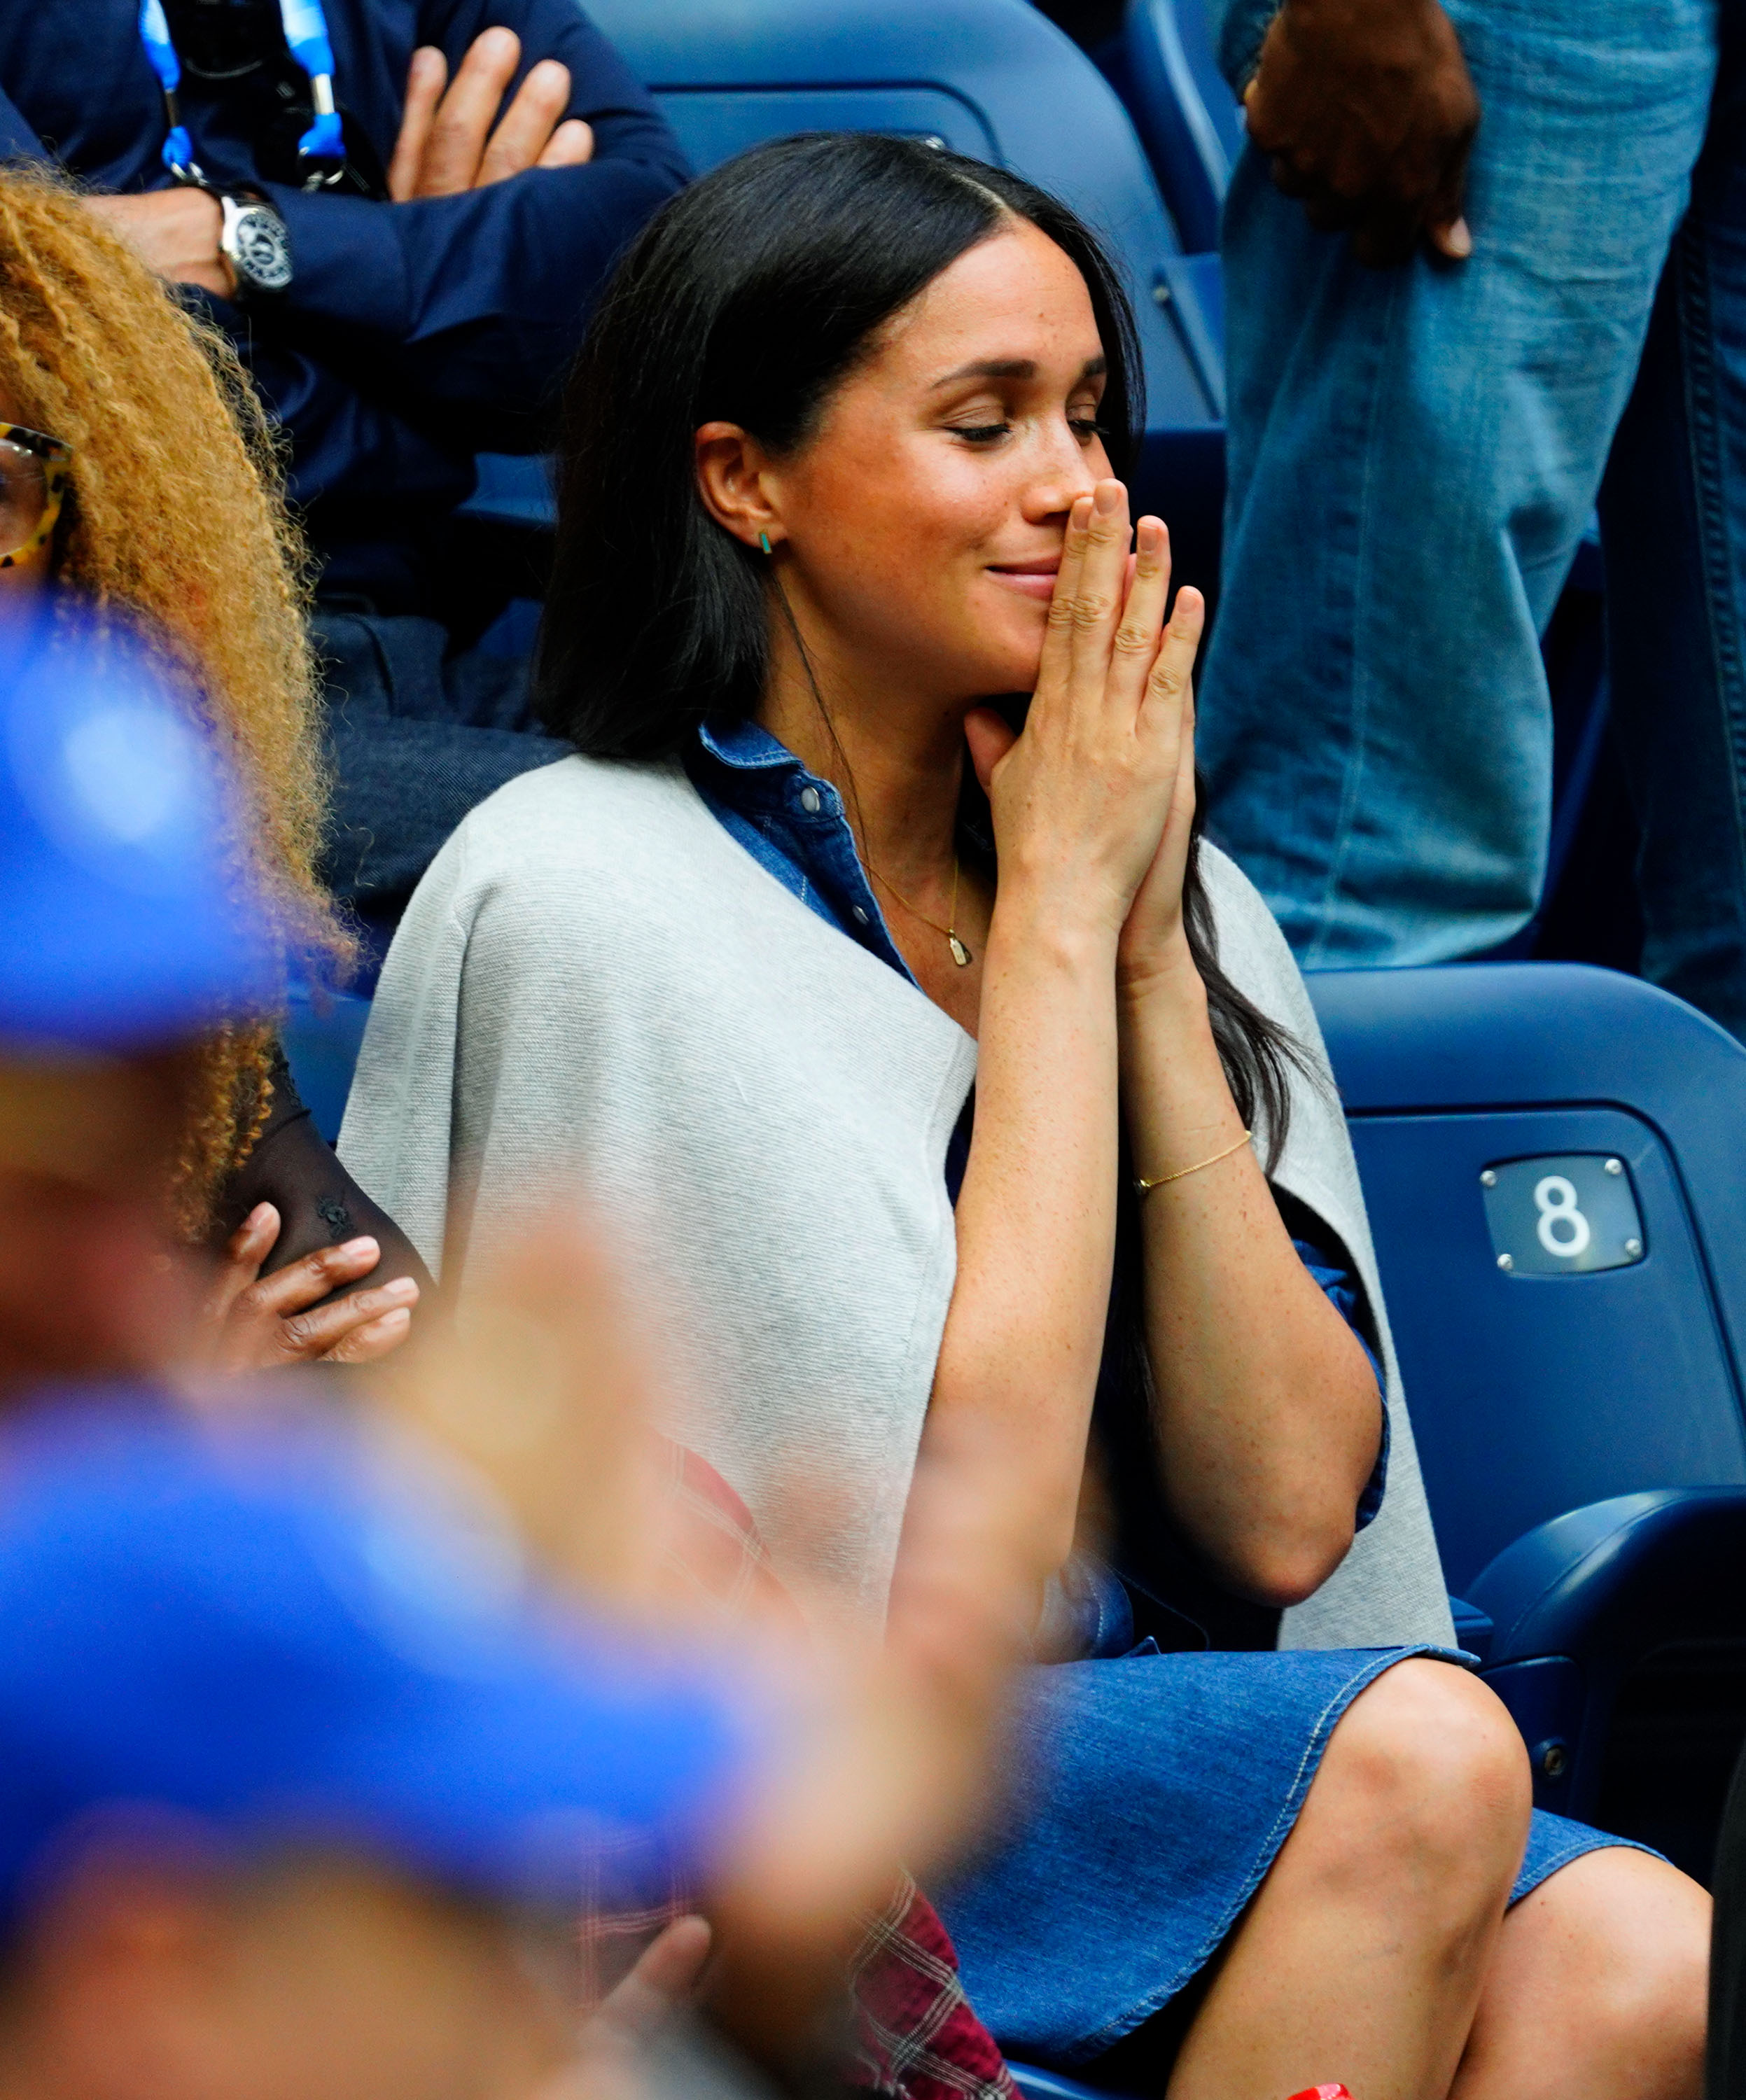 Meghan Markle watches Serena Williams at the 2019 US Open Women's final on September 7, 2019 in New York City | Source: Getty Images